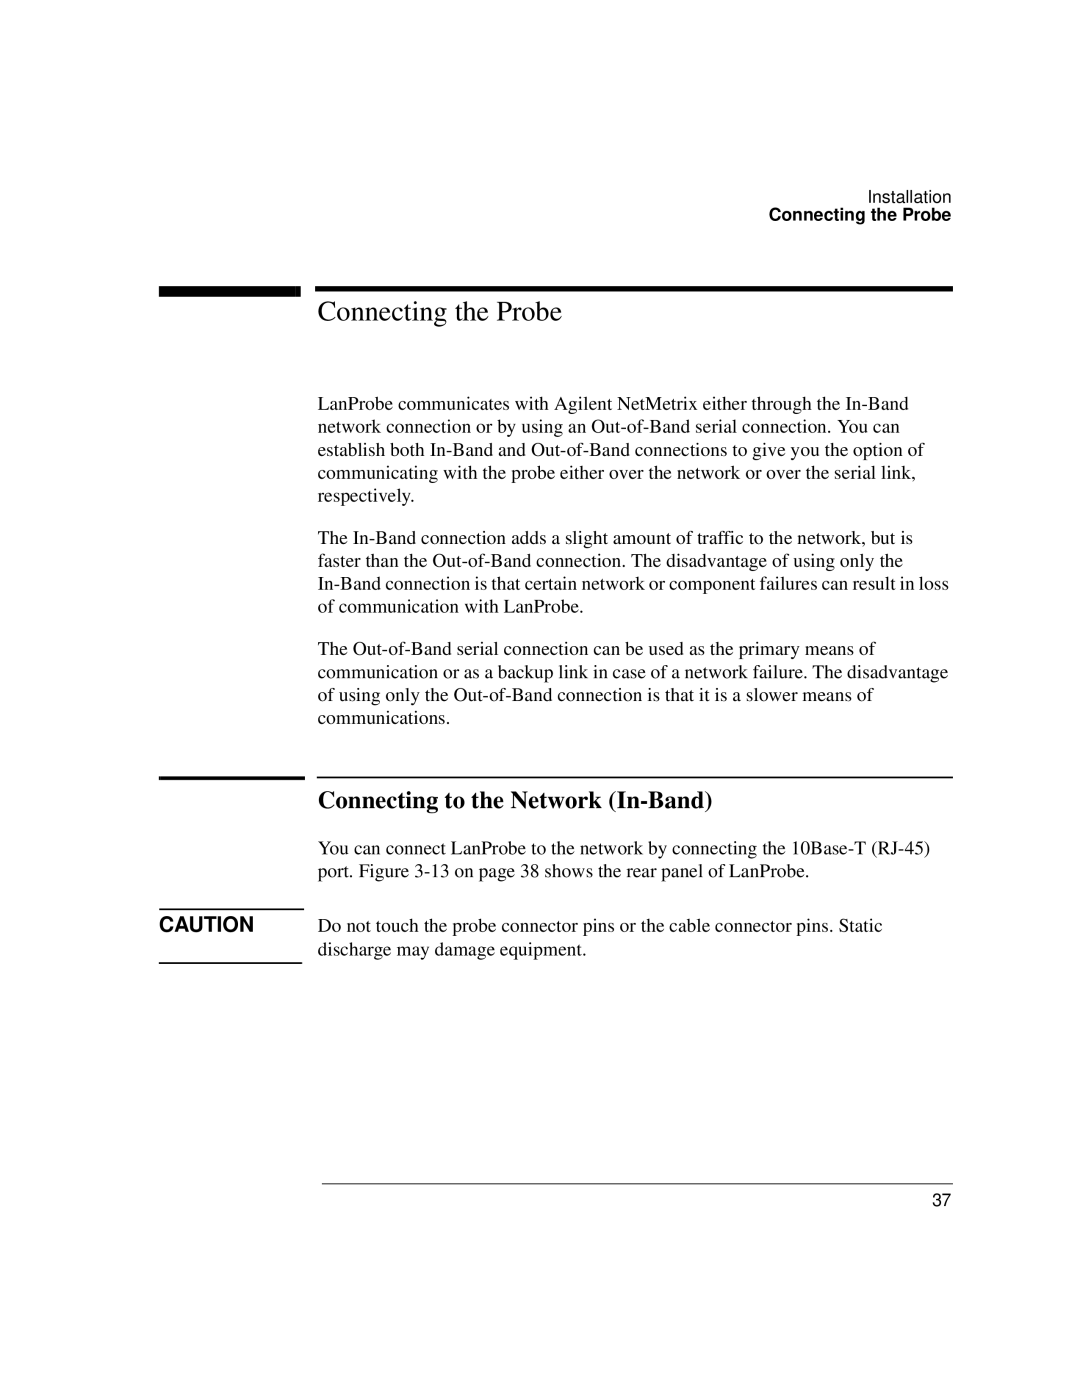 IBM 4986B LanProbe manual Connecting the Probe, Connecting to the Network In-Band 